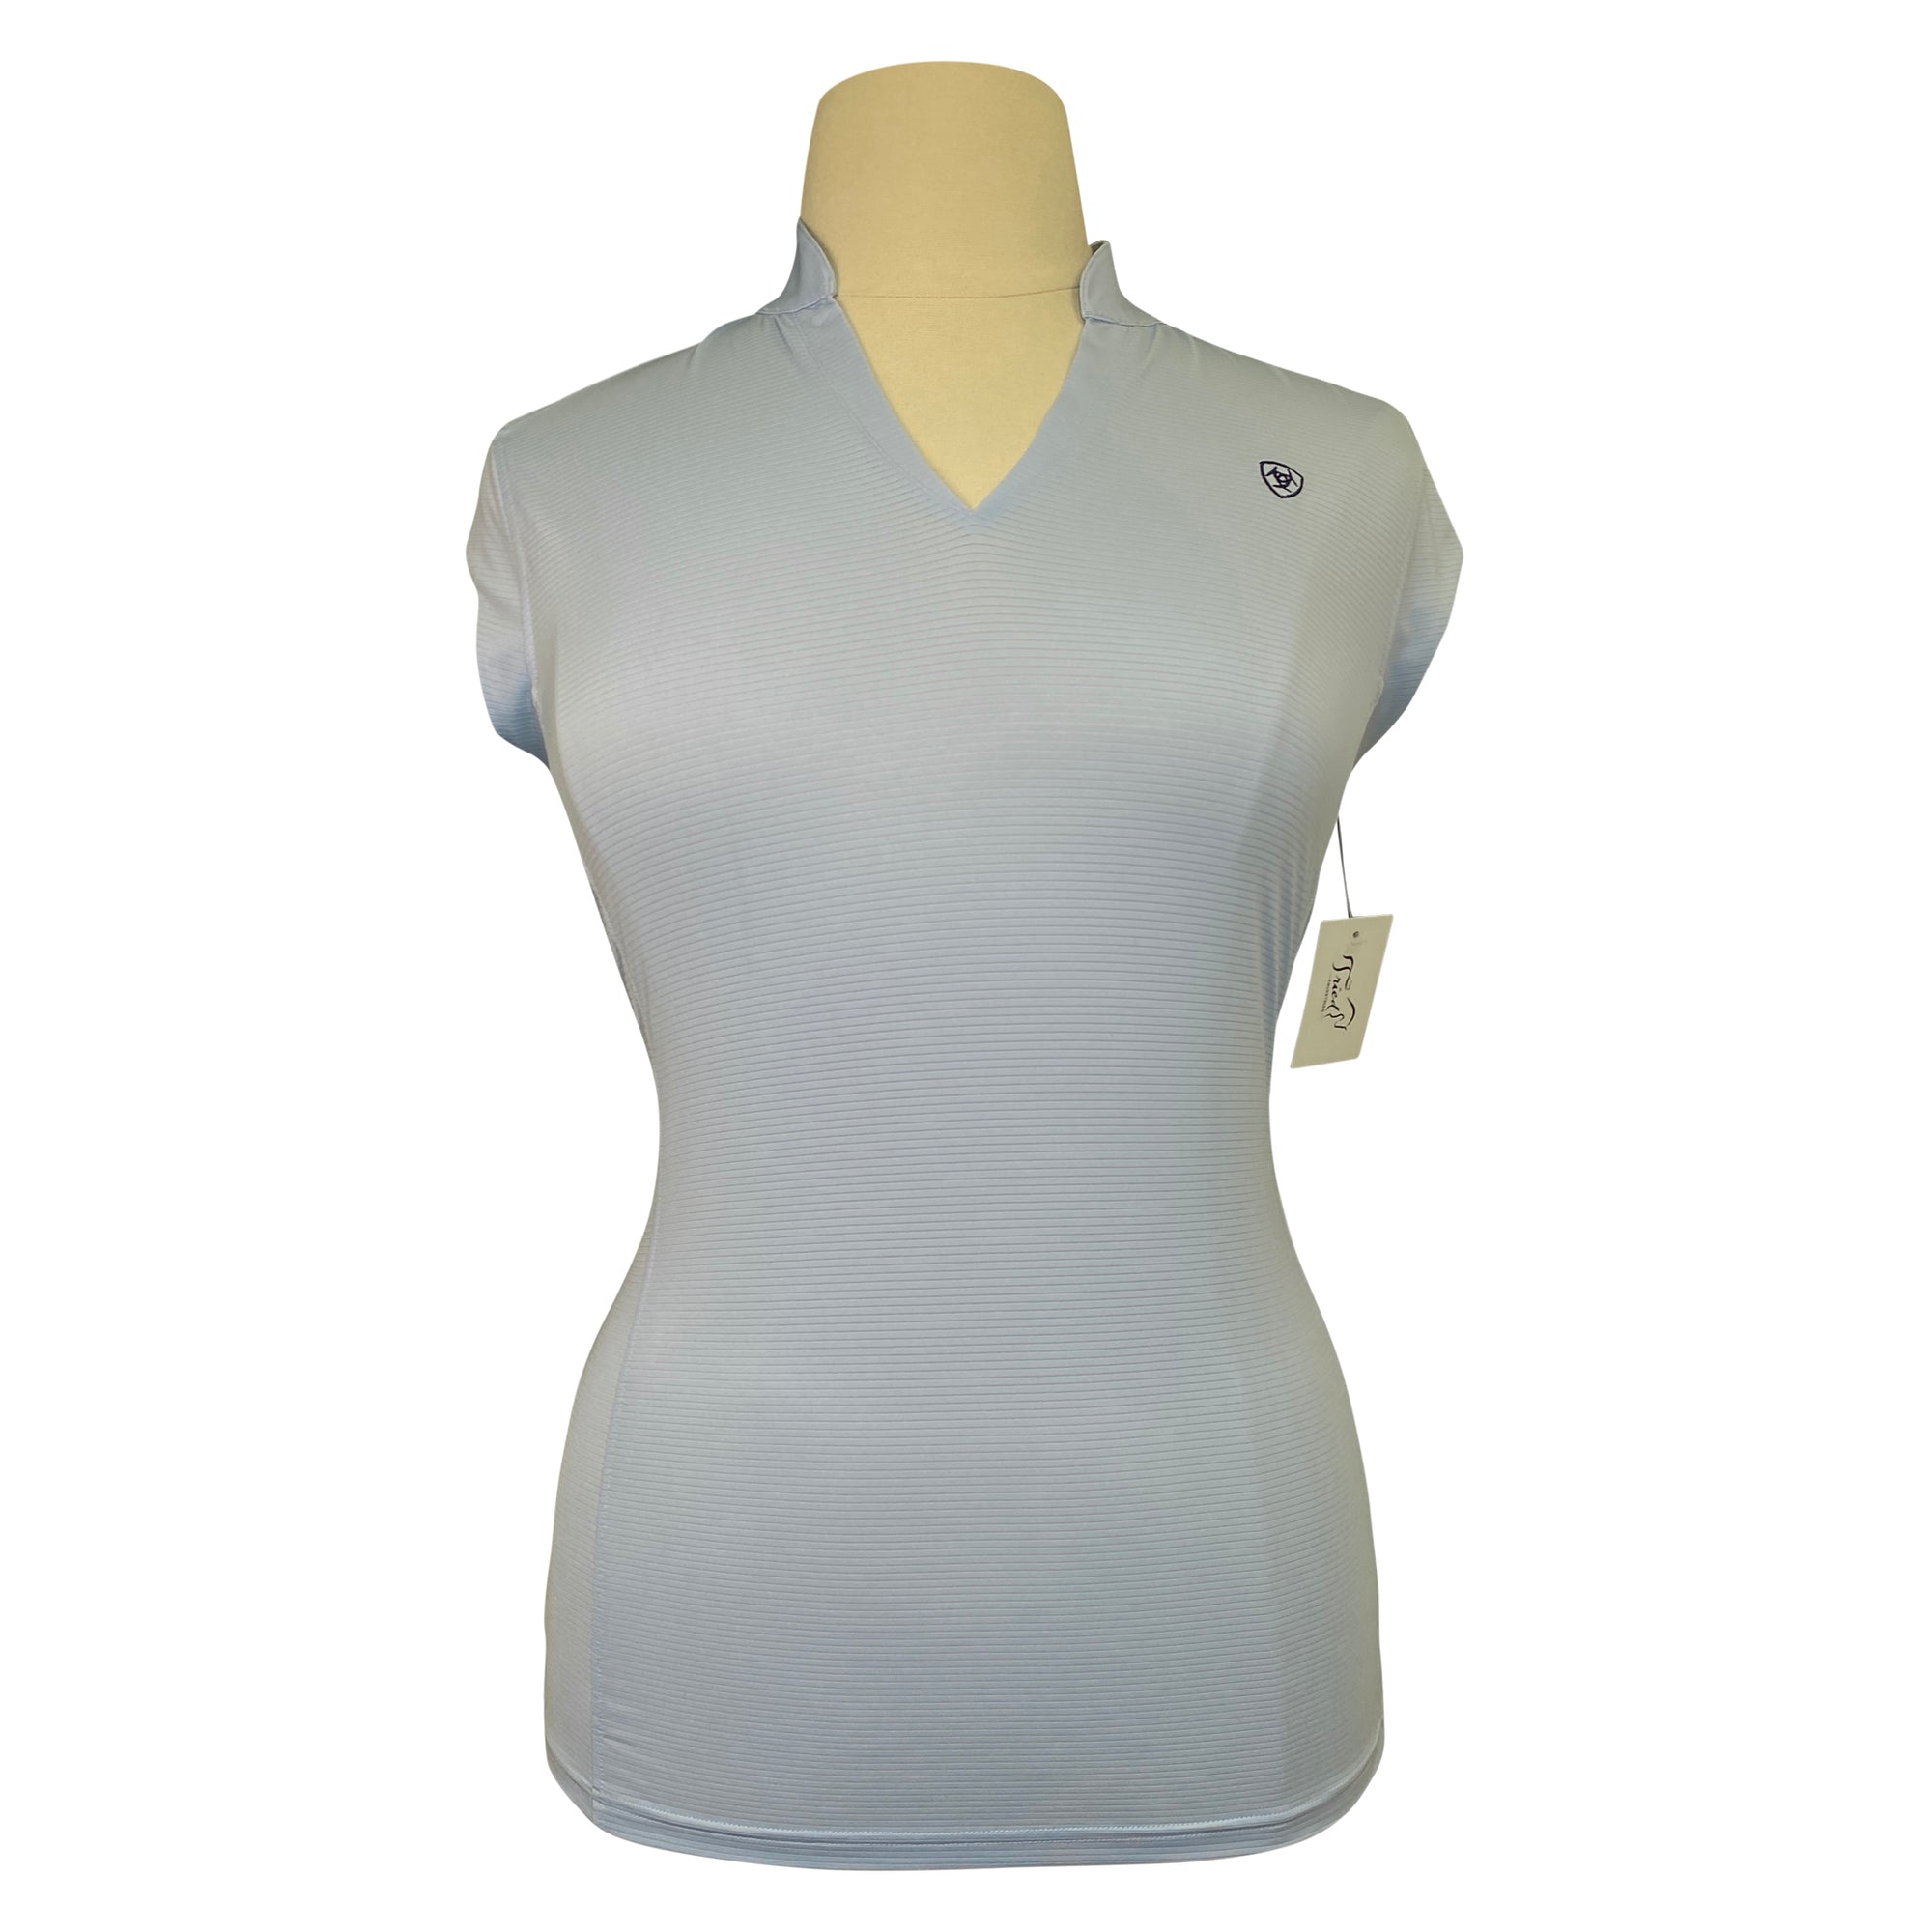 Ariat 'Cambria' Cap Sleeve Shirt in Cashmere Blue